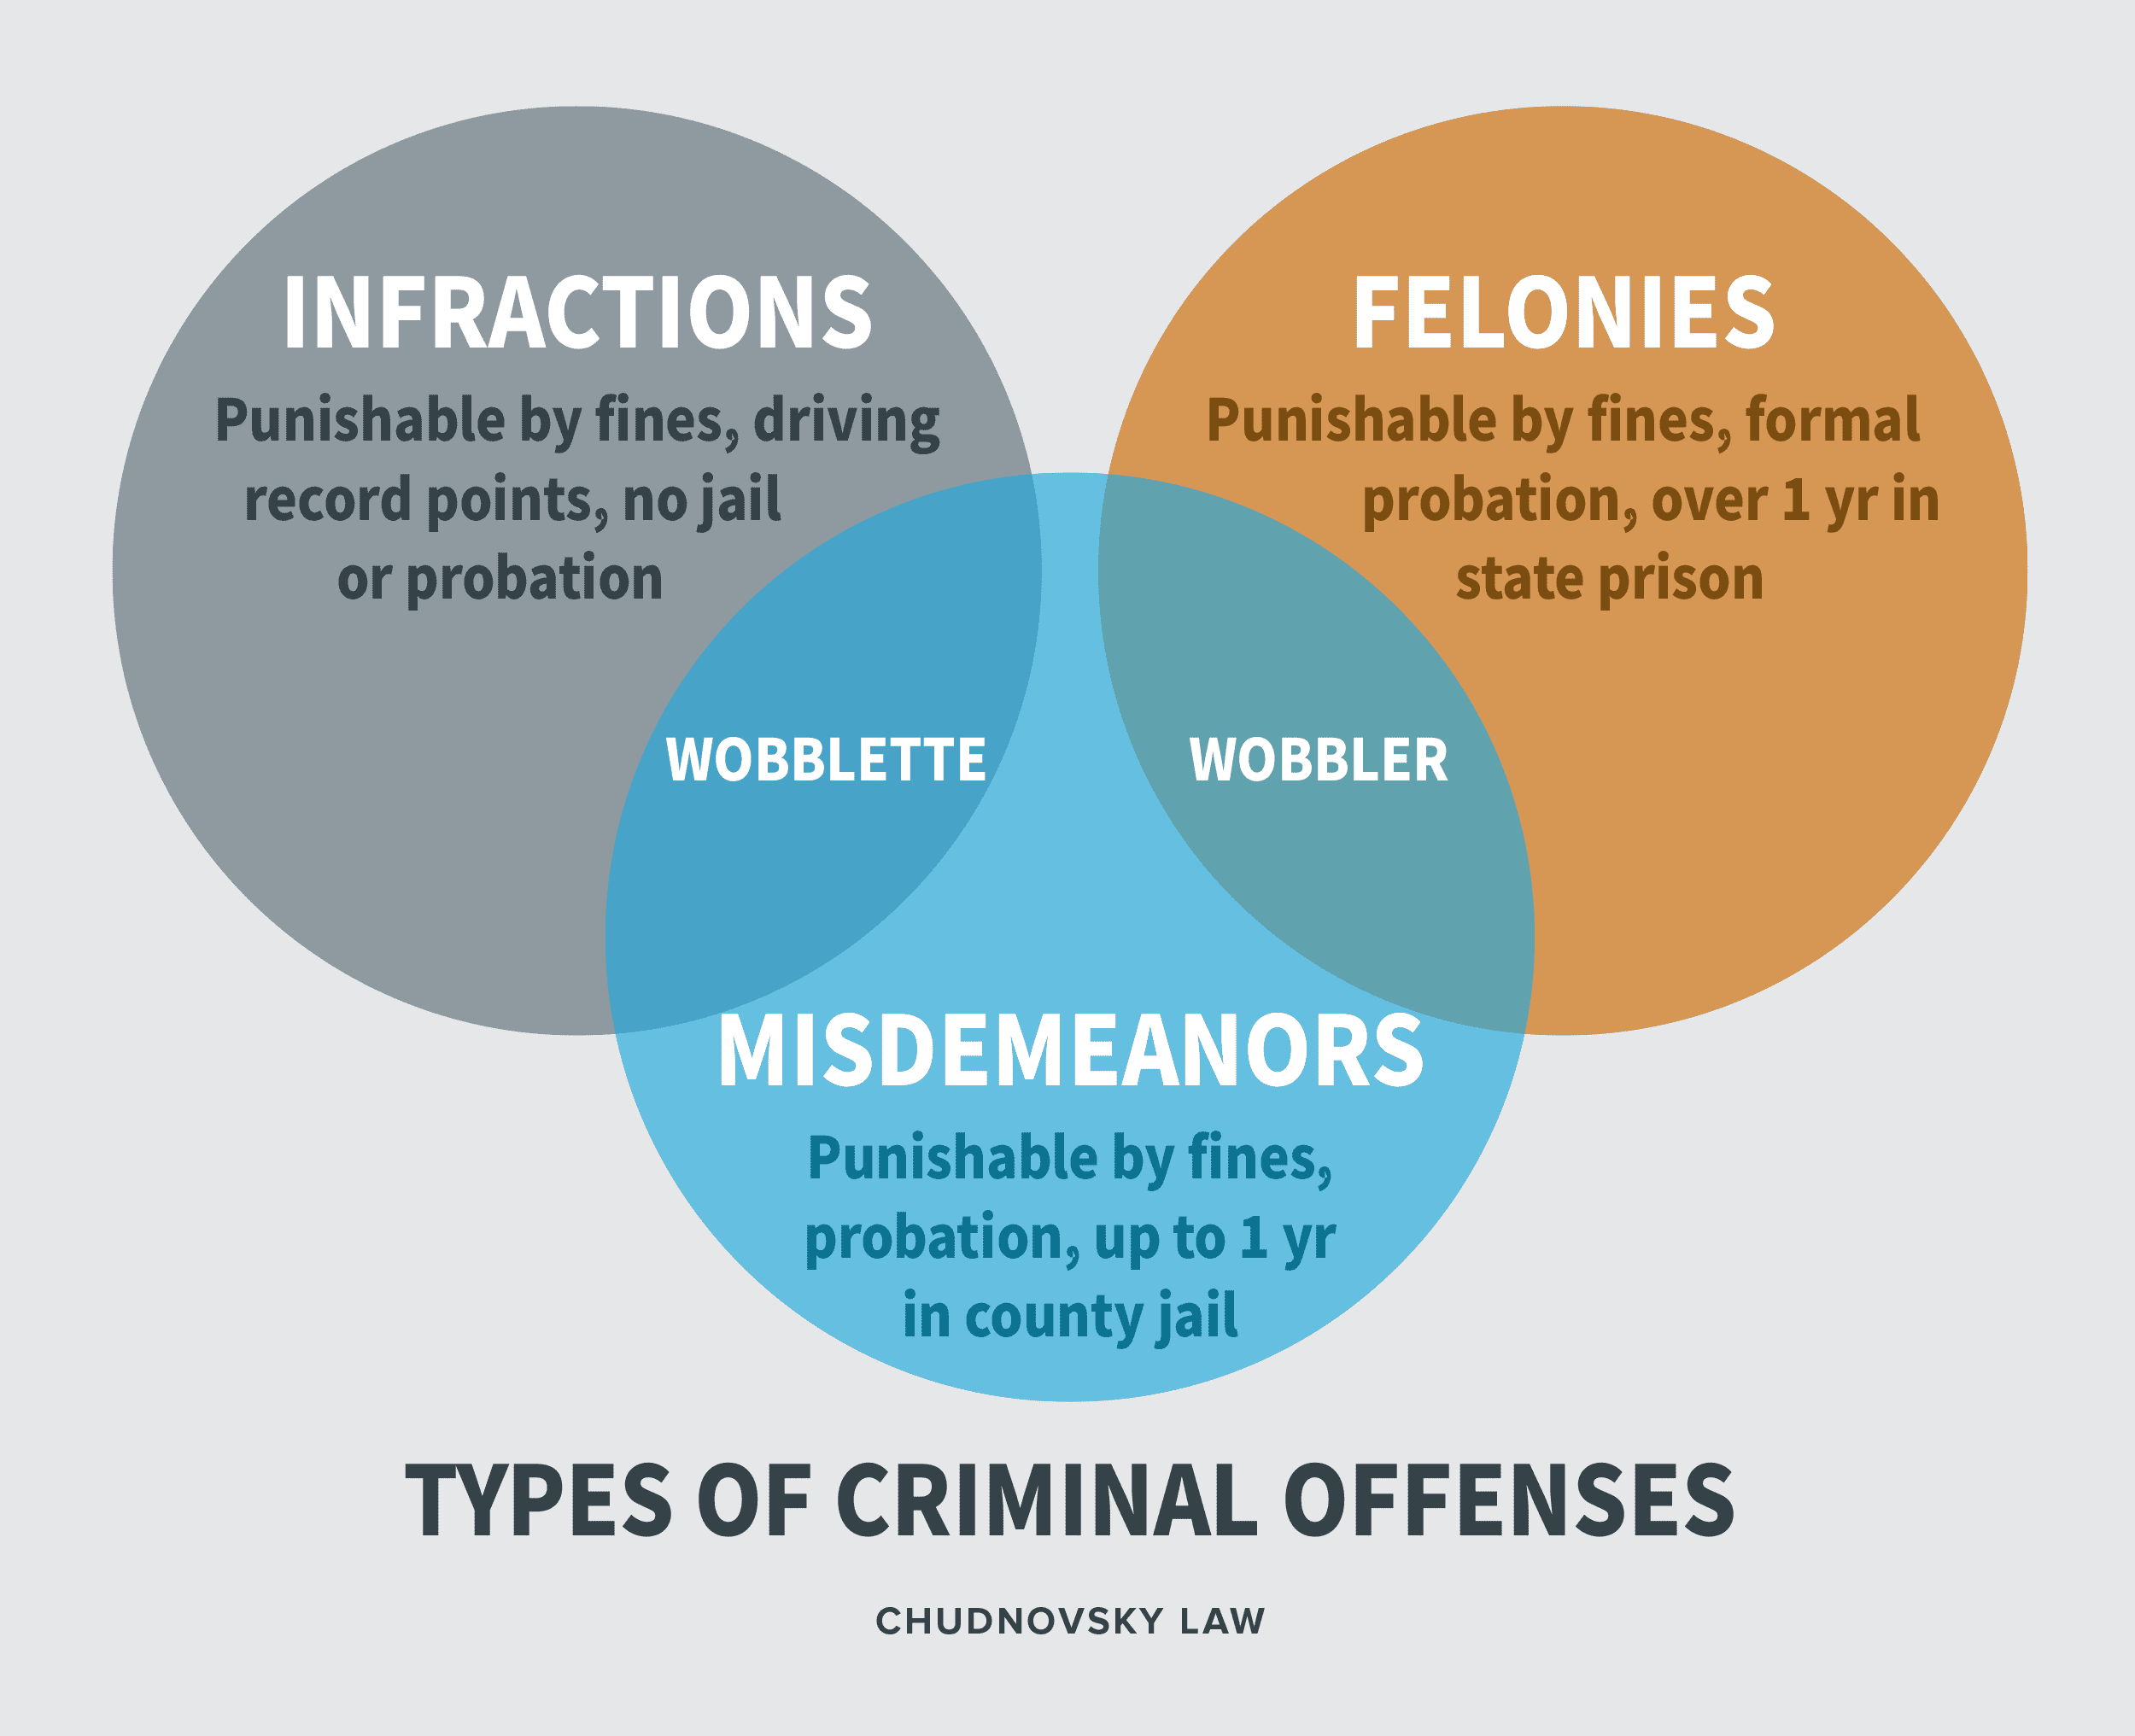 Illustration comparing infraction, misdemeanor and felony criminal offenses along with the concept of wobbler and wobblette offenses.